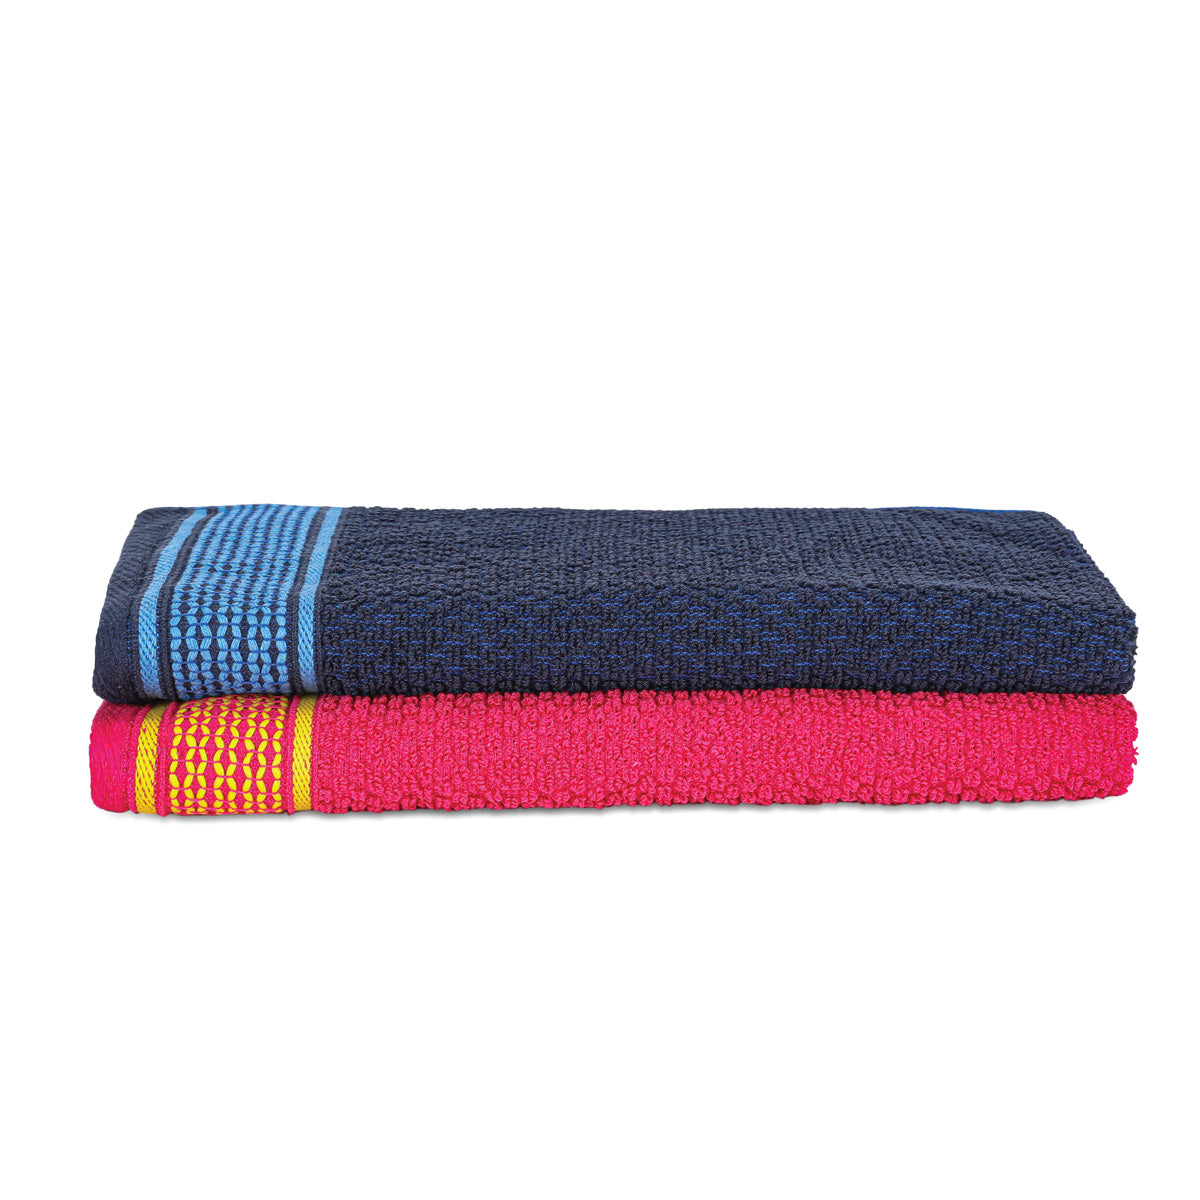 Hand Towel - Navy Blue and Coral Red